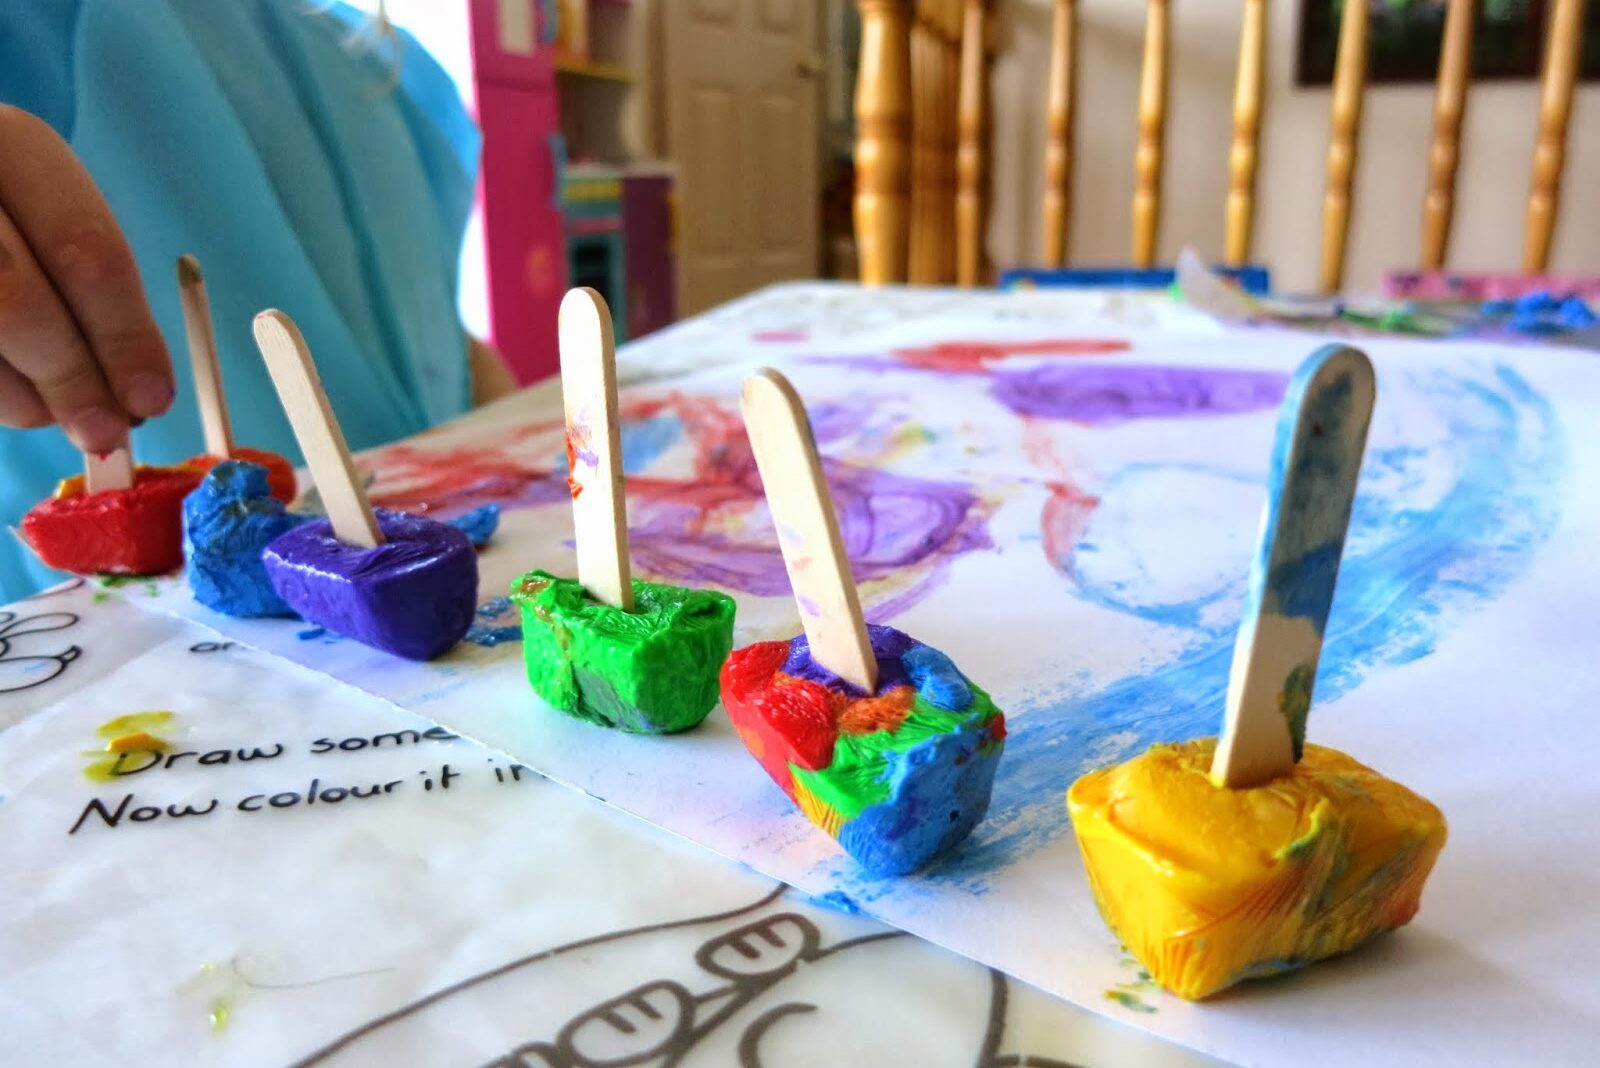 10 Quirky Painting Techniques Your Kids Will Enjoy